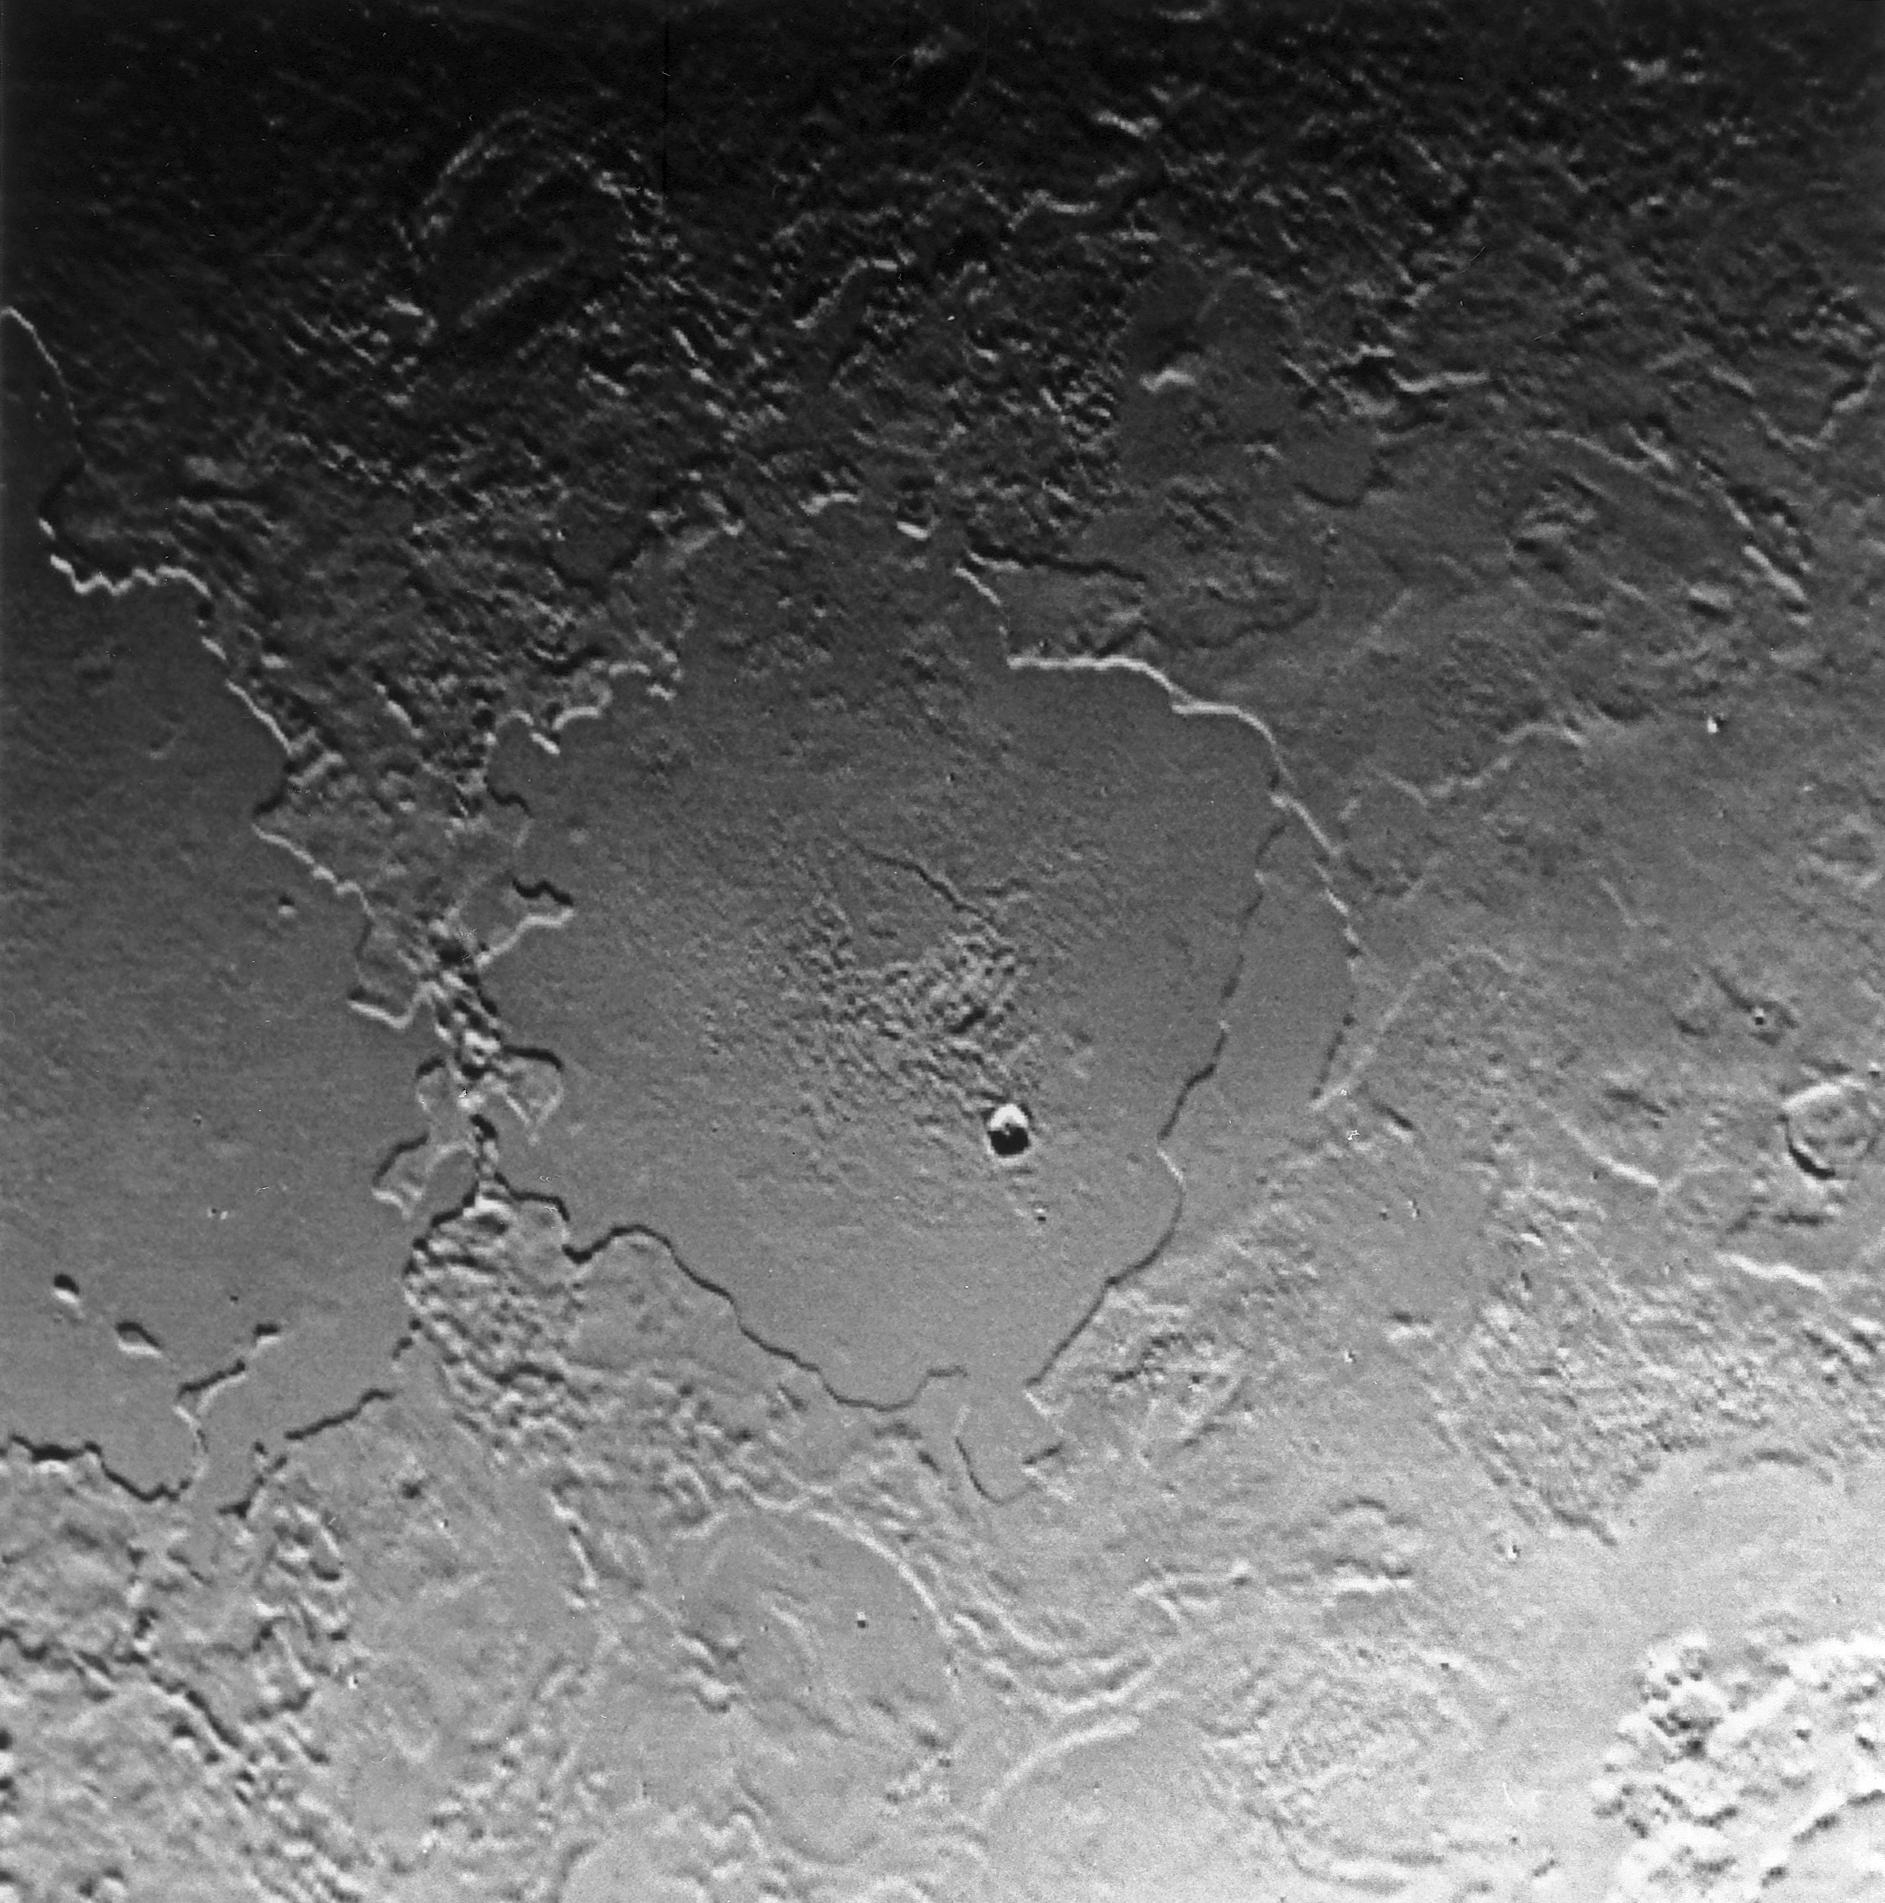 Part of the complex geologic history of icy Triton, Neptune's largest satellite, is shown in this Voyager 2 photo, which has a resolution of 900 meters (2,700 feet) per picture element.